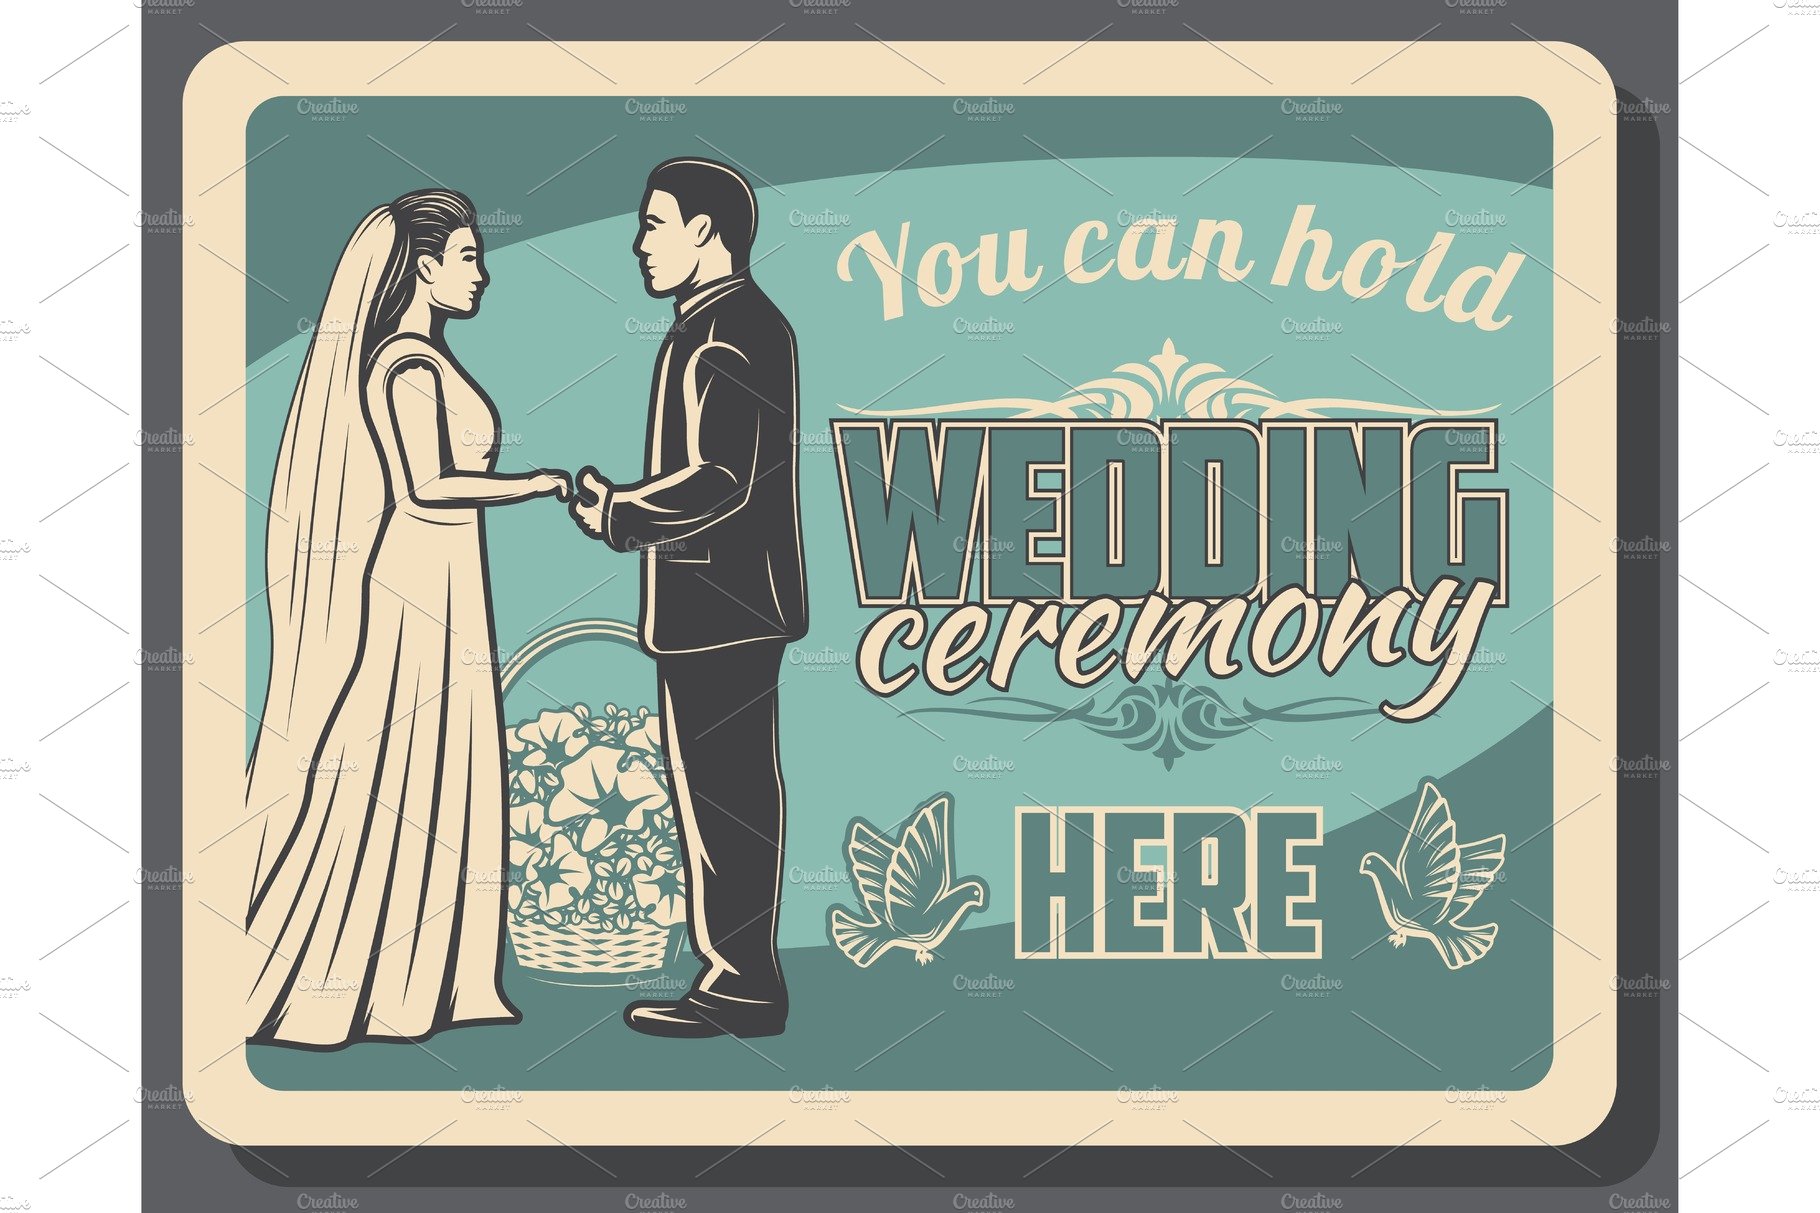 Bride and groom, wedding ceremony cover image.